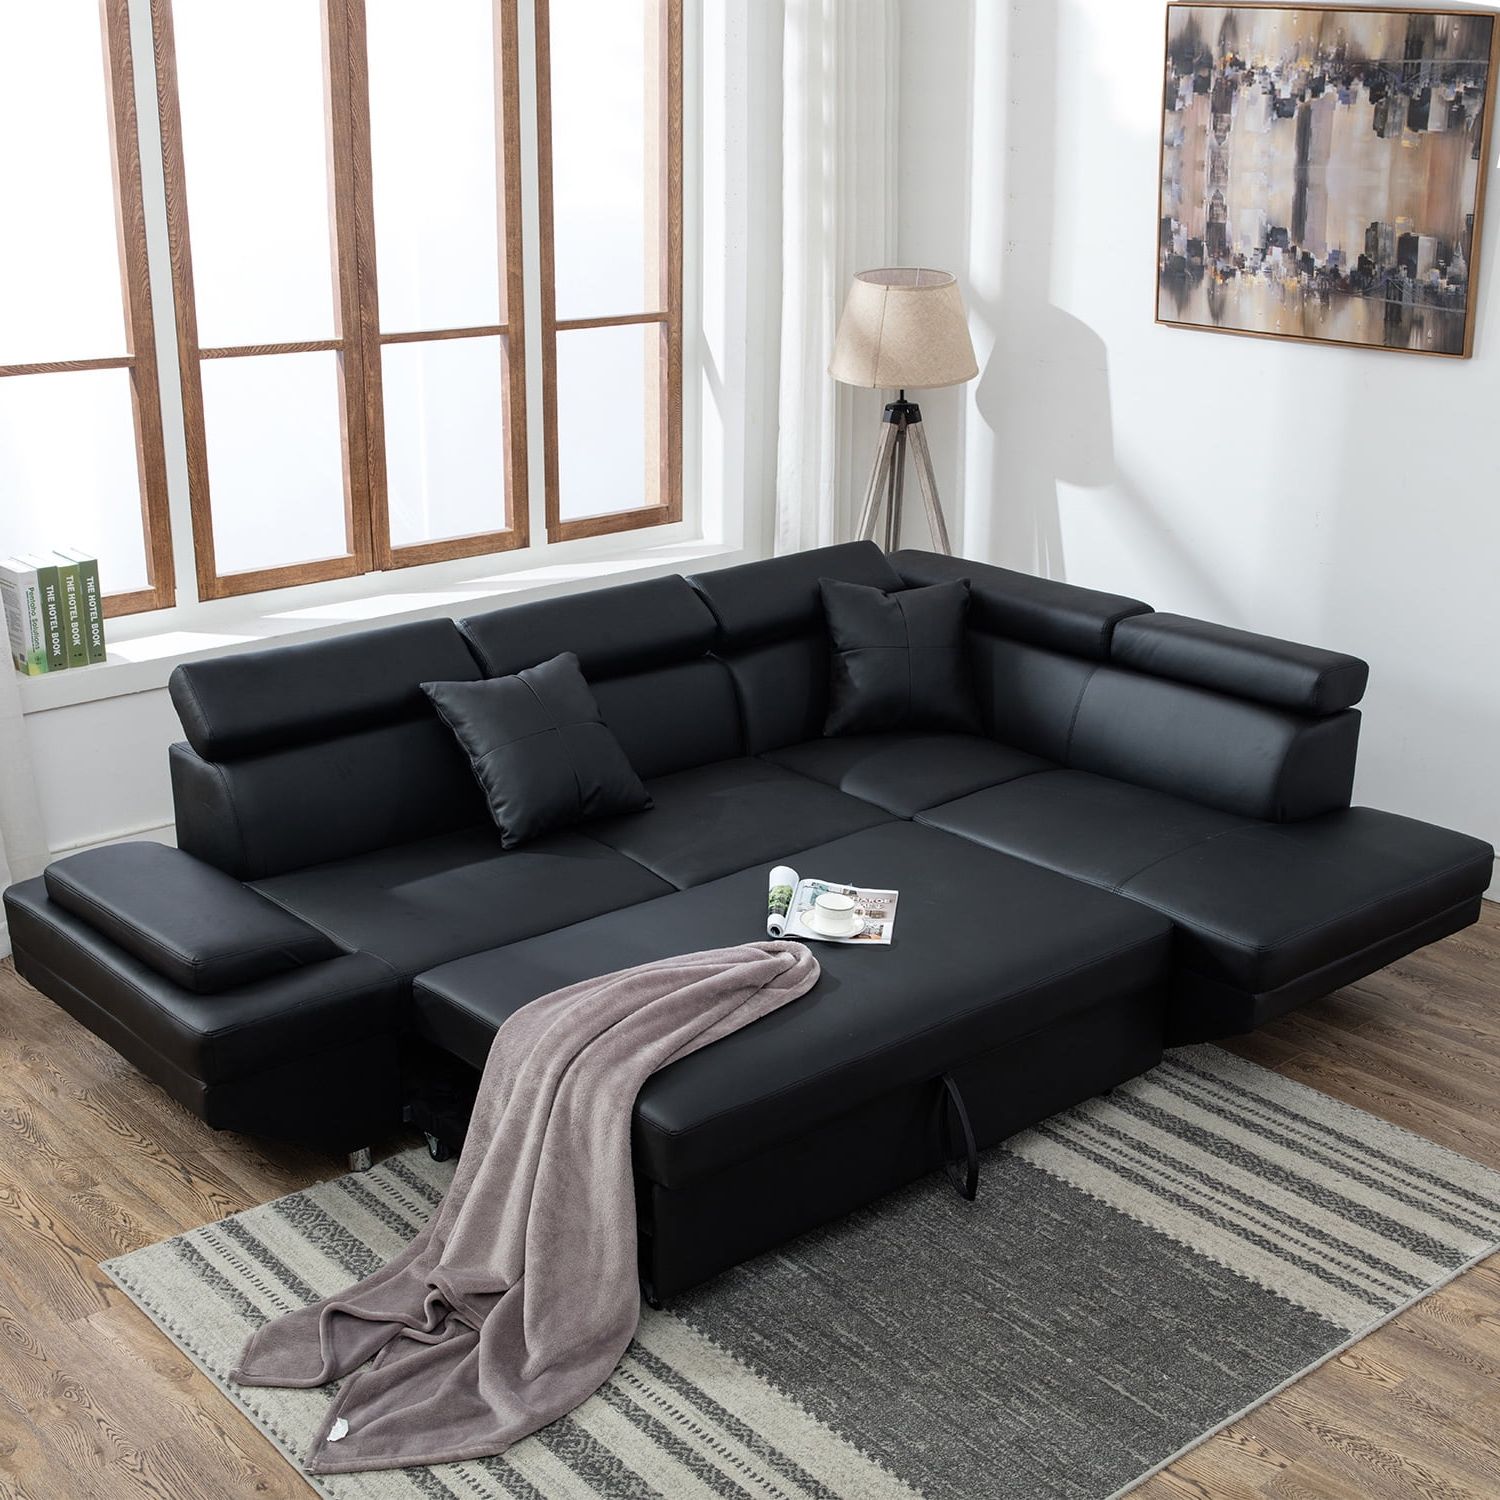 Best Choice Products 3 Seat L Shape Tufted Faux Leather Sectional Sofa Within 3 Seat L Shaped Sofas In Black (View 2 of 20)